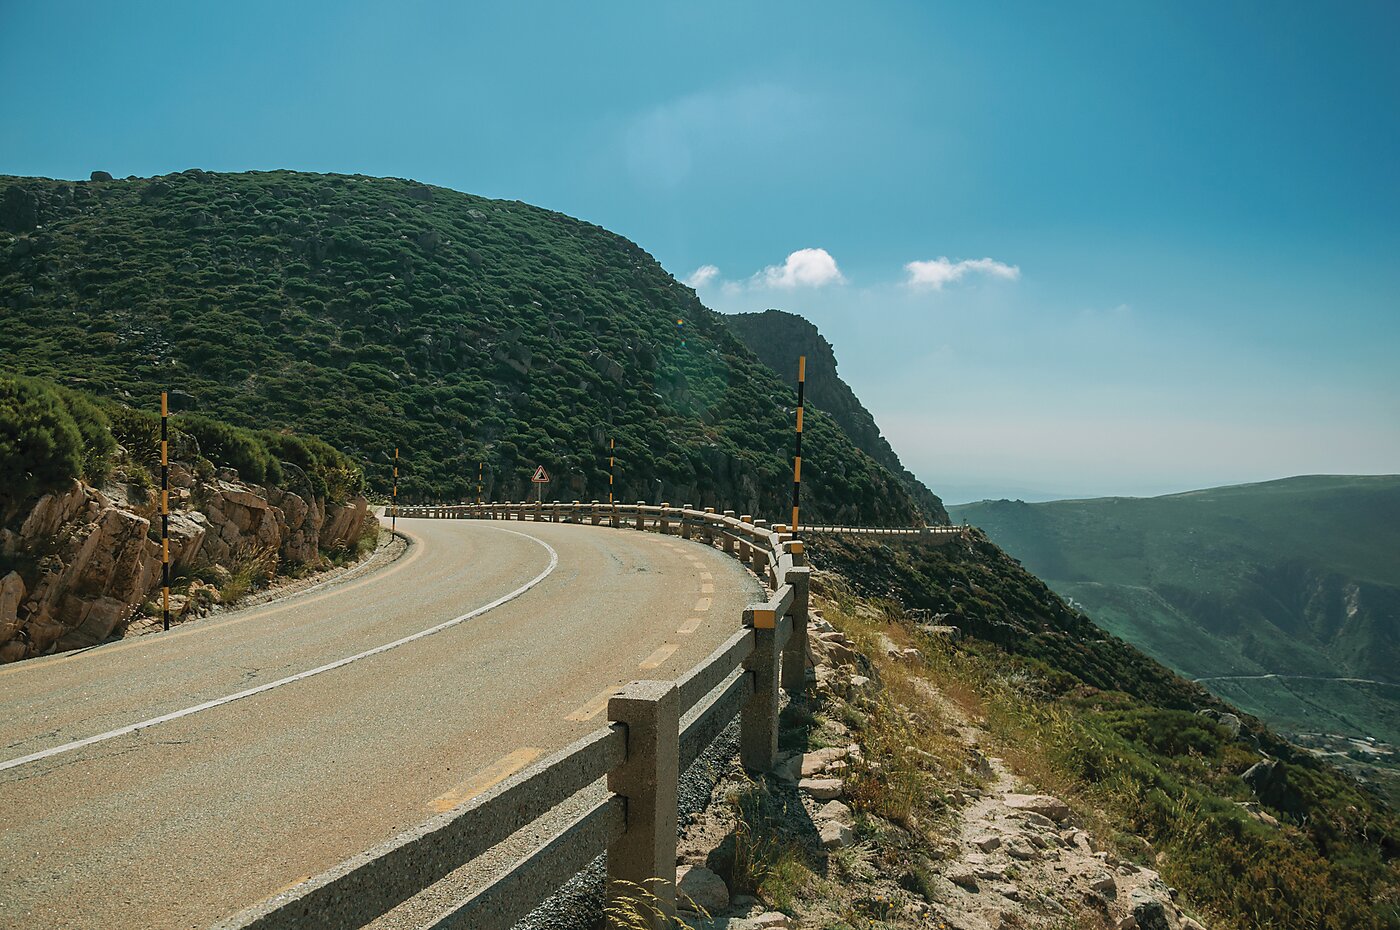 Curved roadway with guardrails passing through mountainous landscape